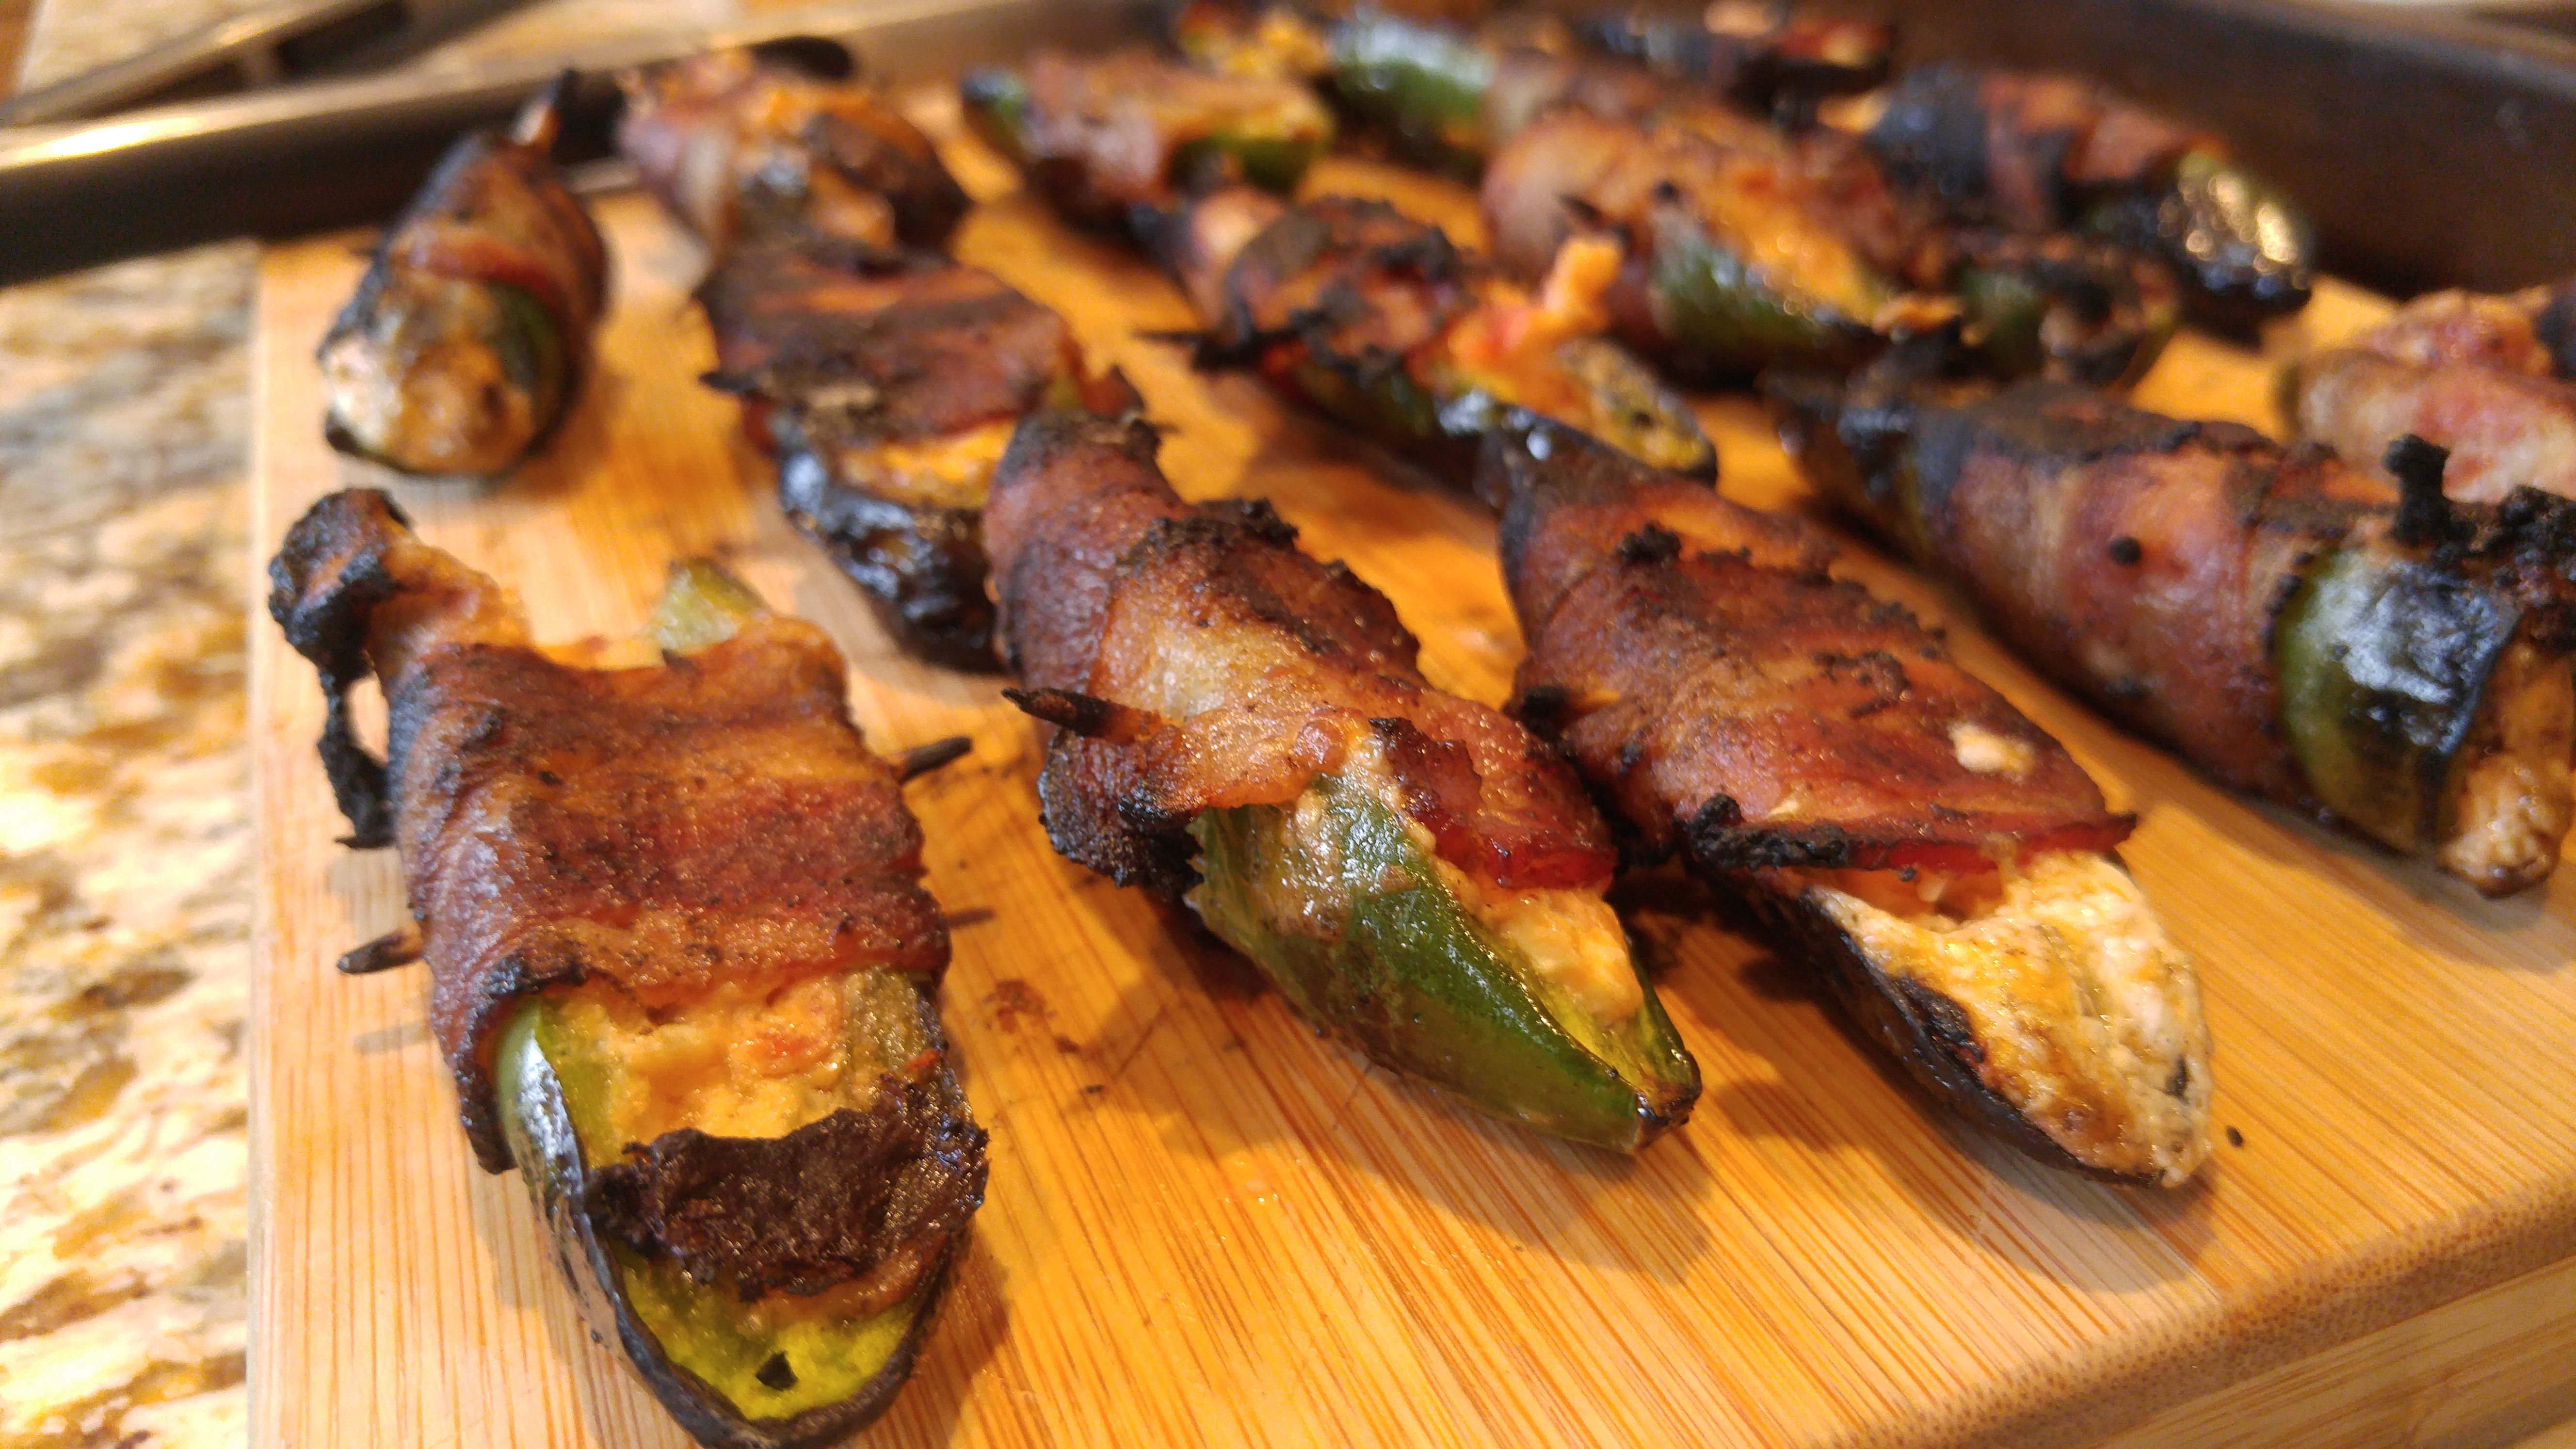 Over the TOP Jalapeno Poppers